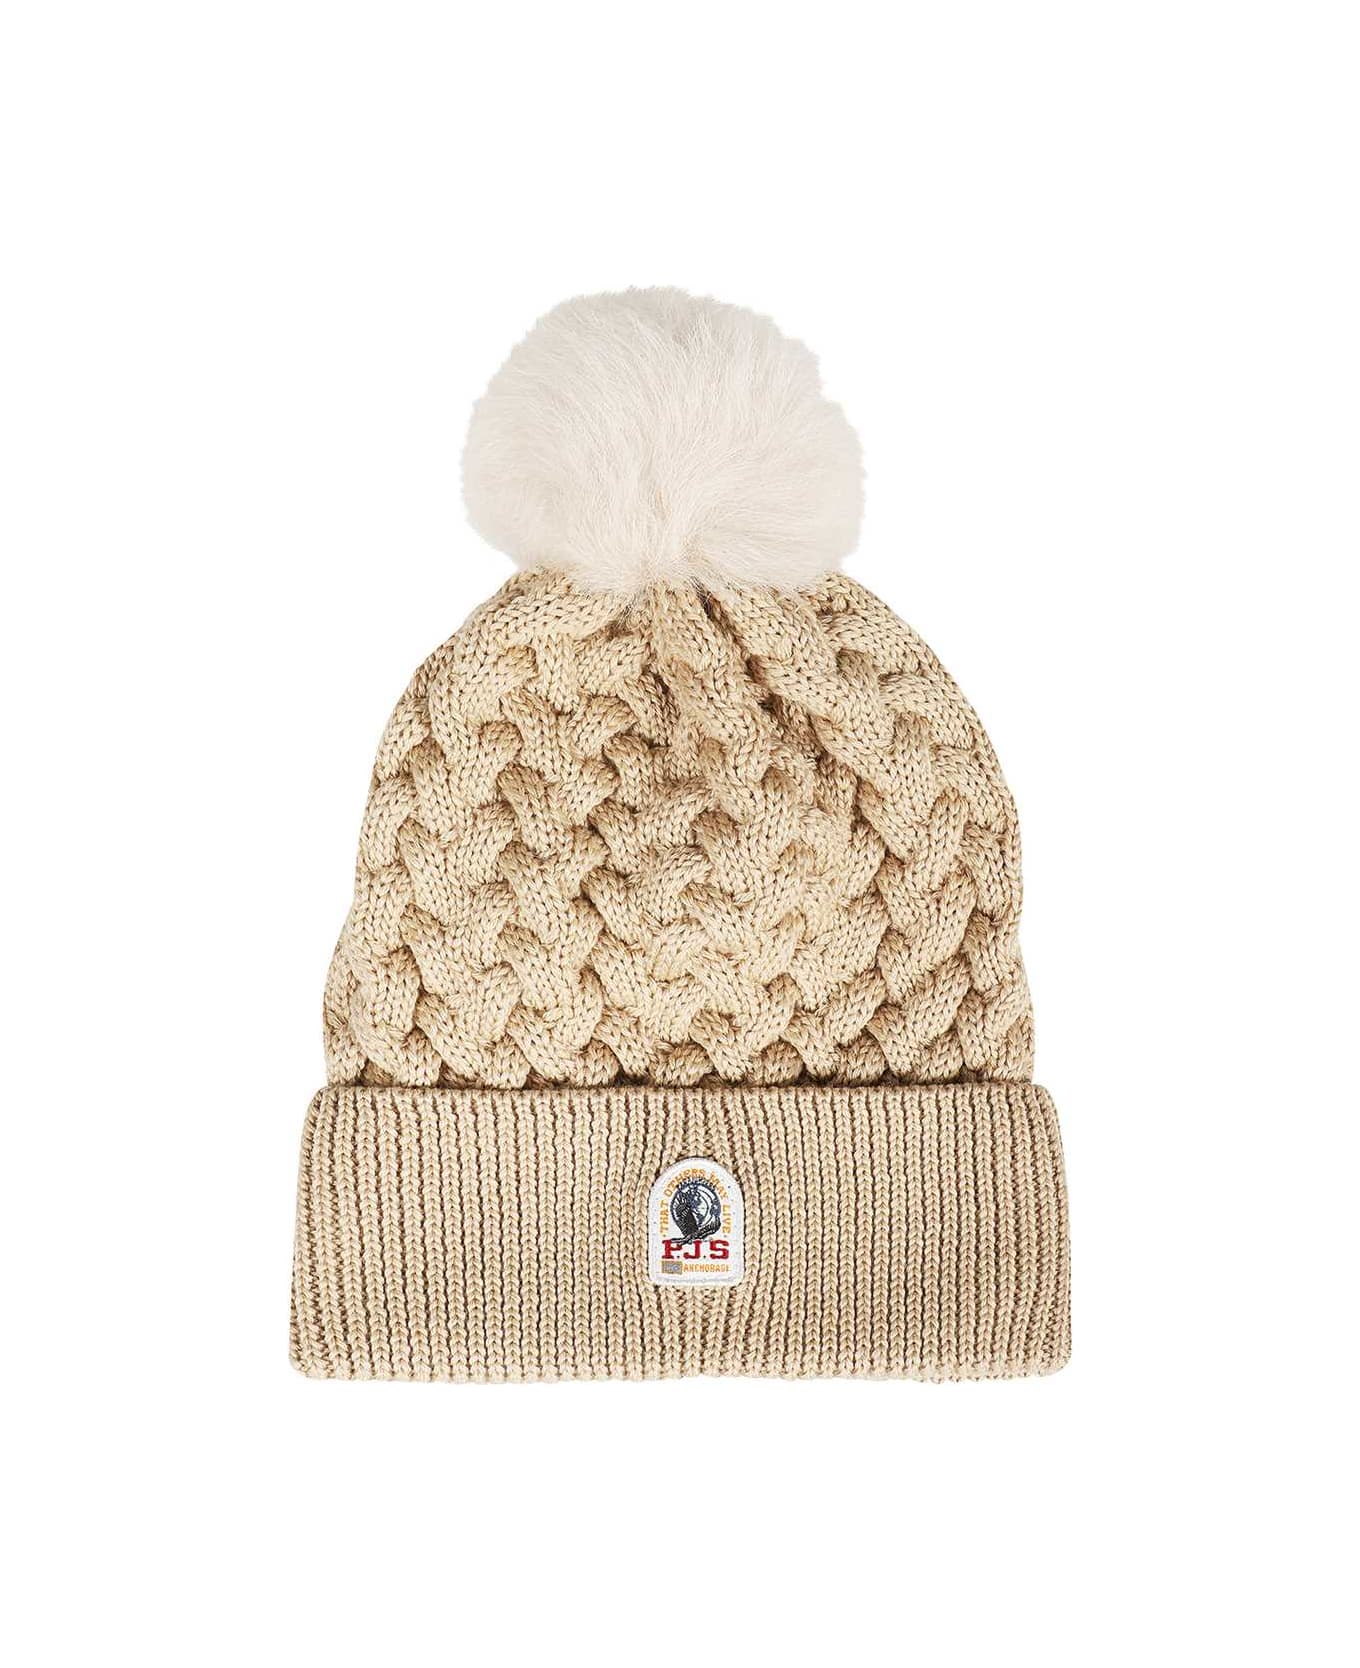 Parajumpers Knitted Beanie With Pom-pom - Camel